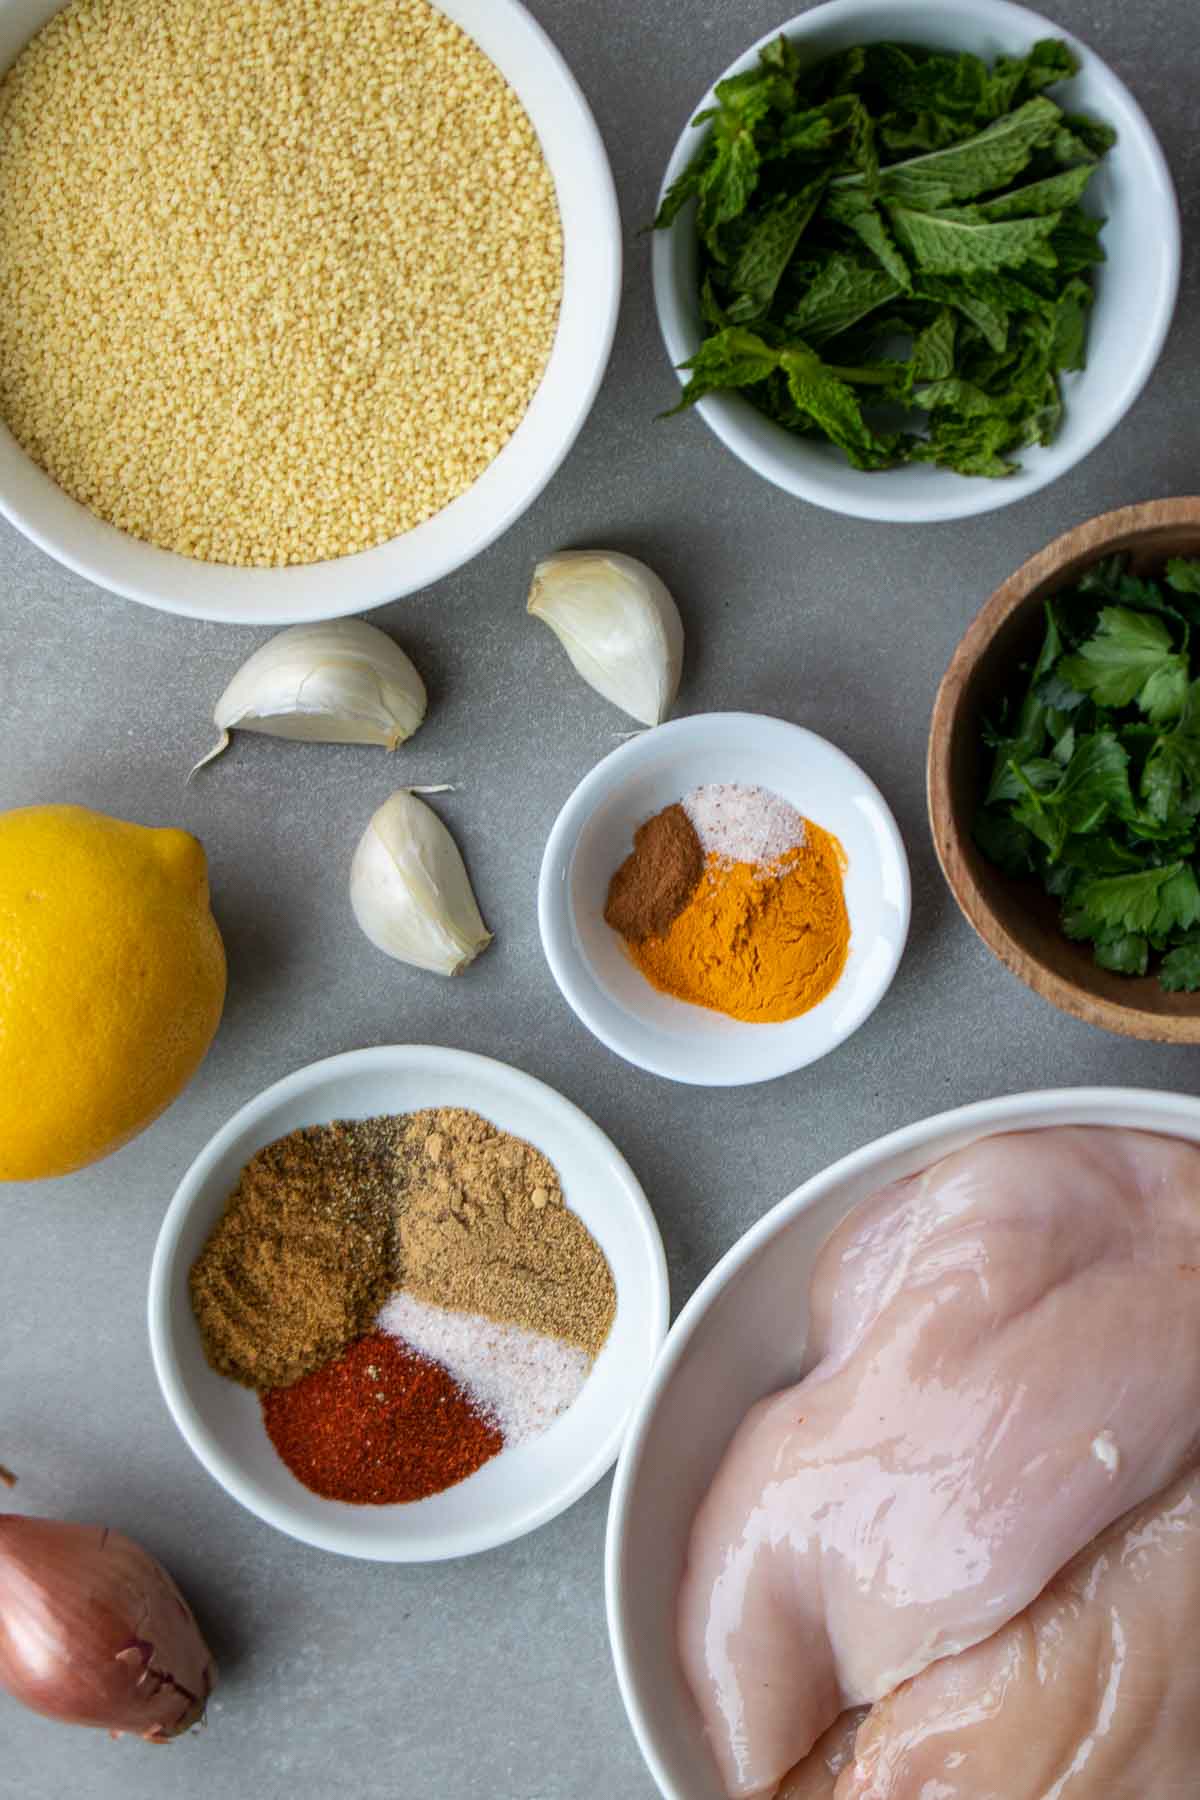 Ingredients for a chicken and couscous recipe including chicken breasts, couscous, garlic, shallot, paprika, cumin, coriander, salt, turmeric, cinnamon, lemon, mint, and parsley